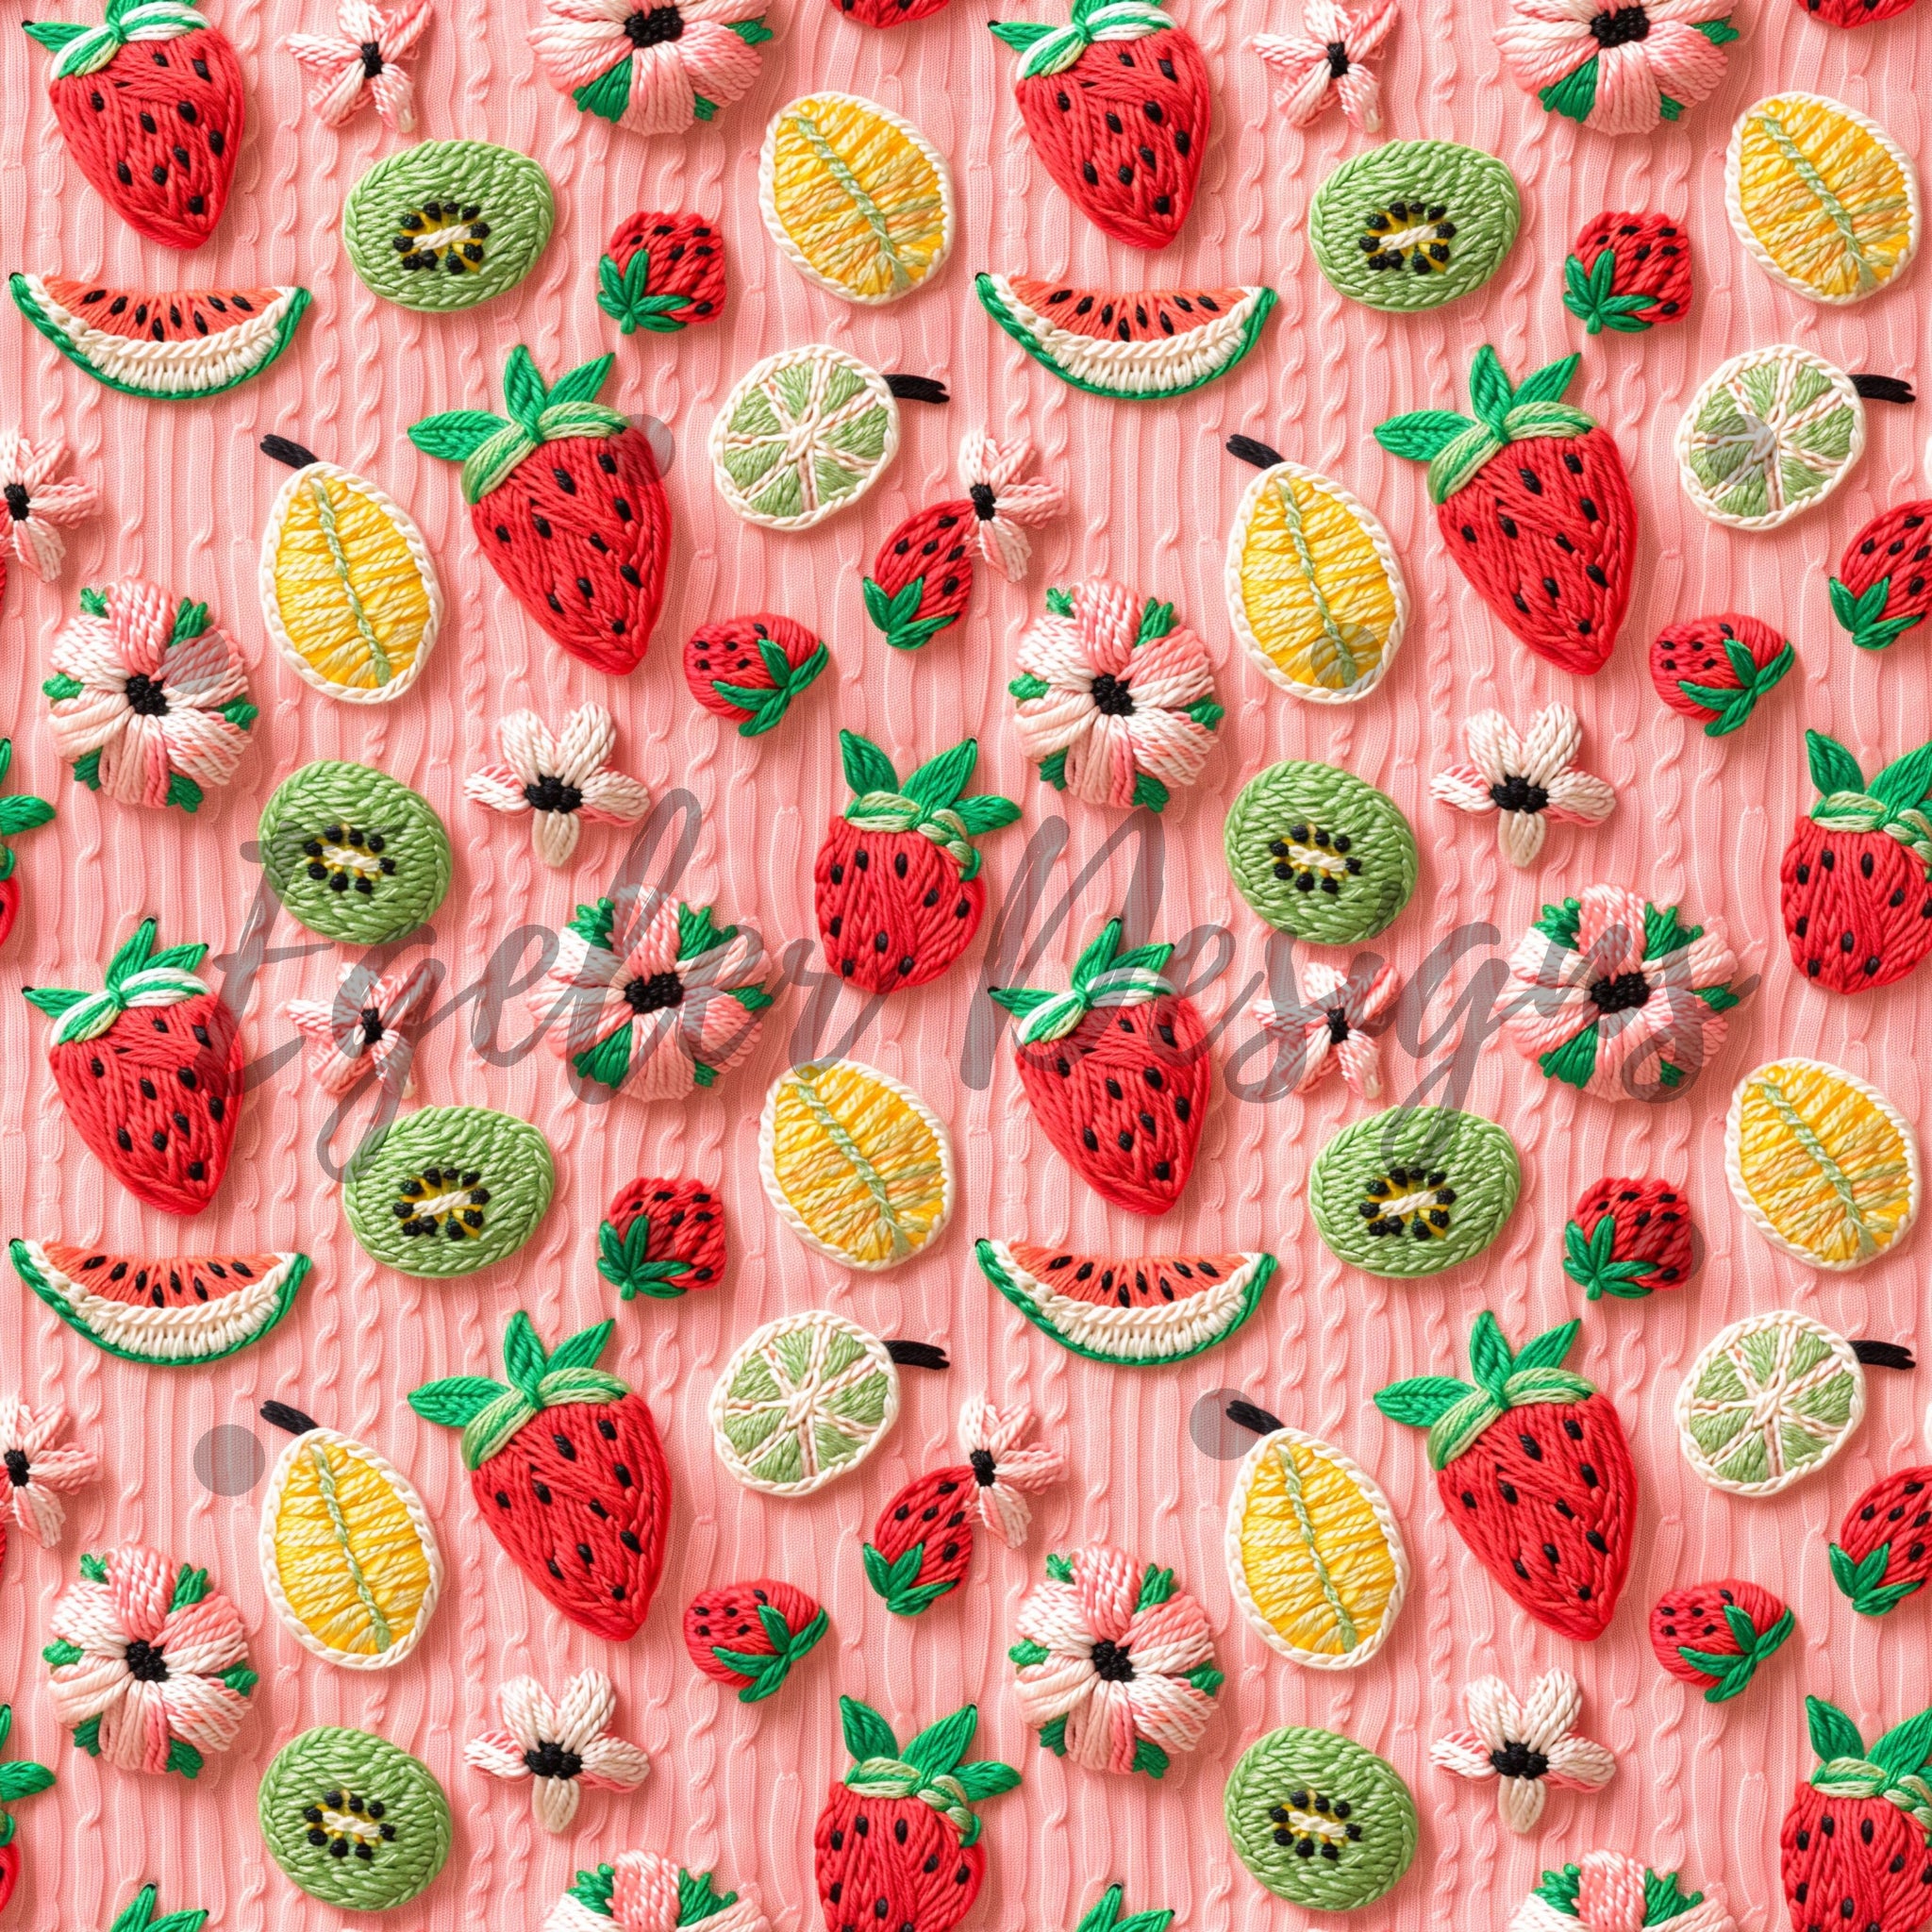 Knit Embroidery Fruit Seamless Pattern Digital Download